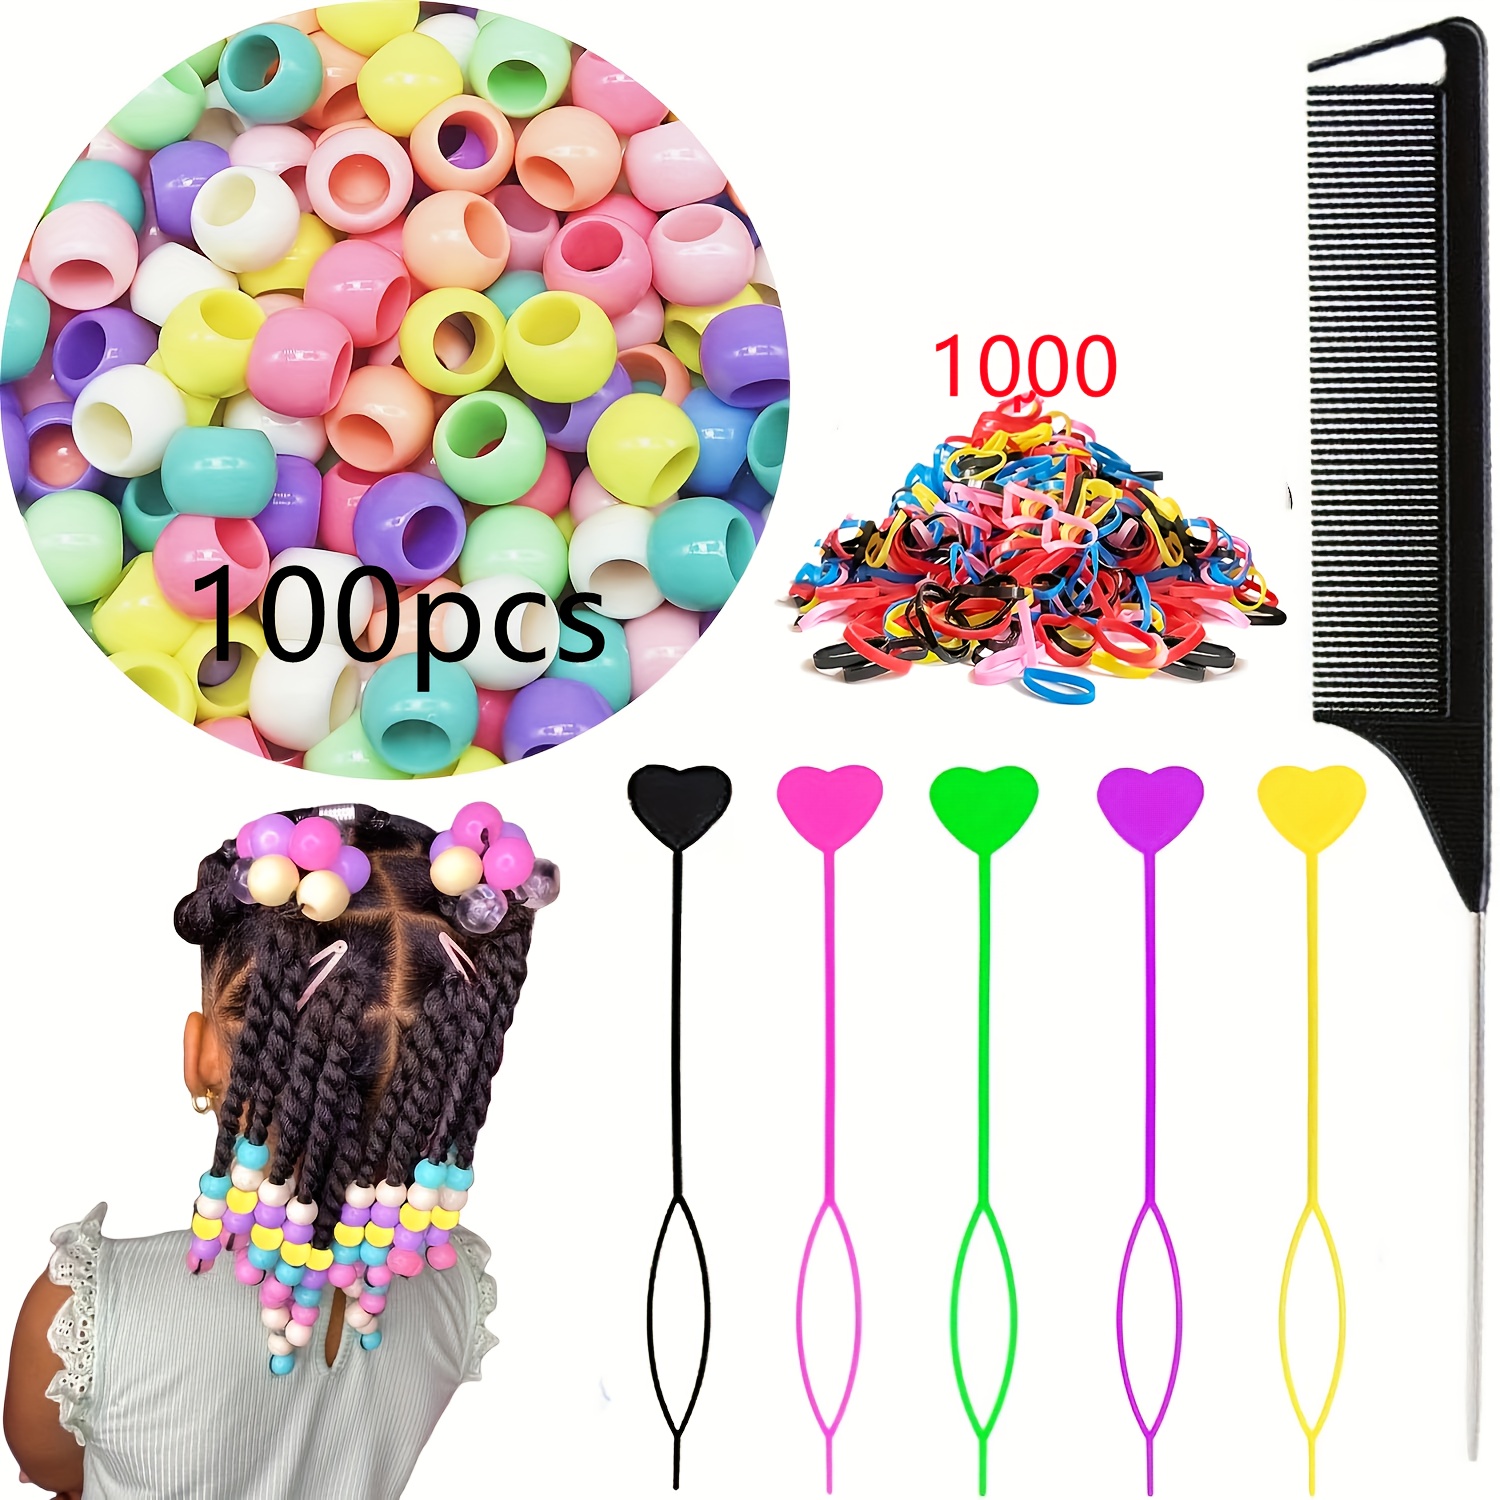 405 Pcs Hair Beads Kit for Girls Kids Hair Braids Including 200 Pieces  6x9mm Plastic Colorful Hair Beads 200 Pcs Elastic Rubber Bands 5 Pcs Quick